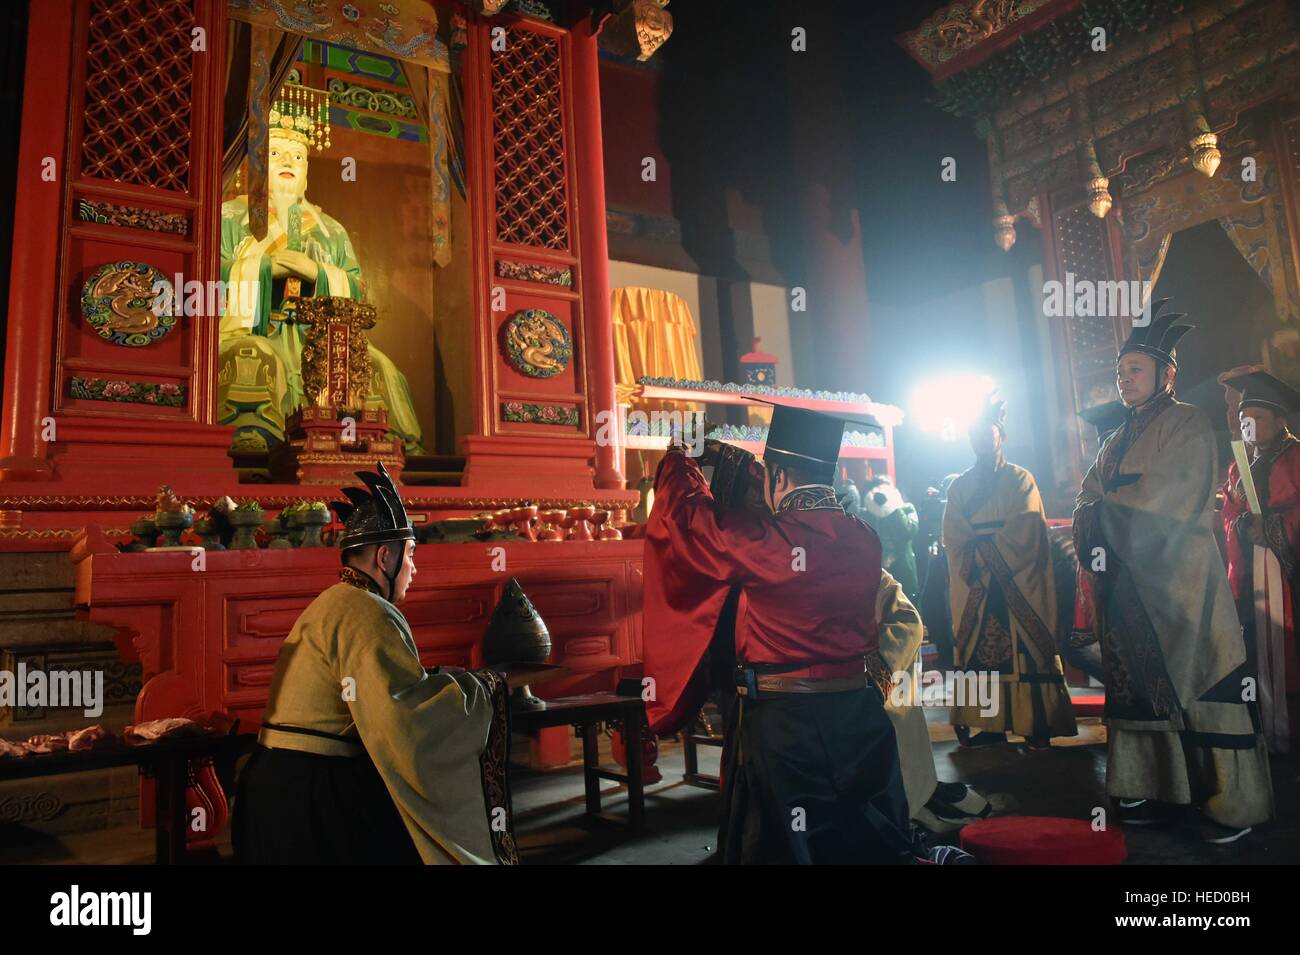 Zoucheng. 21st Dec, 2016. A traditional sacrificial ceremony is held to commemorate Mencius at the Temple and Family Mansion of Mencius in Zoucheng City, east China's Shandong Province, Dec. 21, 2016, the Winter Solstice. Mencius (372-289 BC), or Meng Zi, was a great philosopher of ancient China. He traveled all his life expounding Confucianism. © Zhu Zheng/Xinhua/Alamy Live News Stock Photo